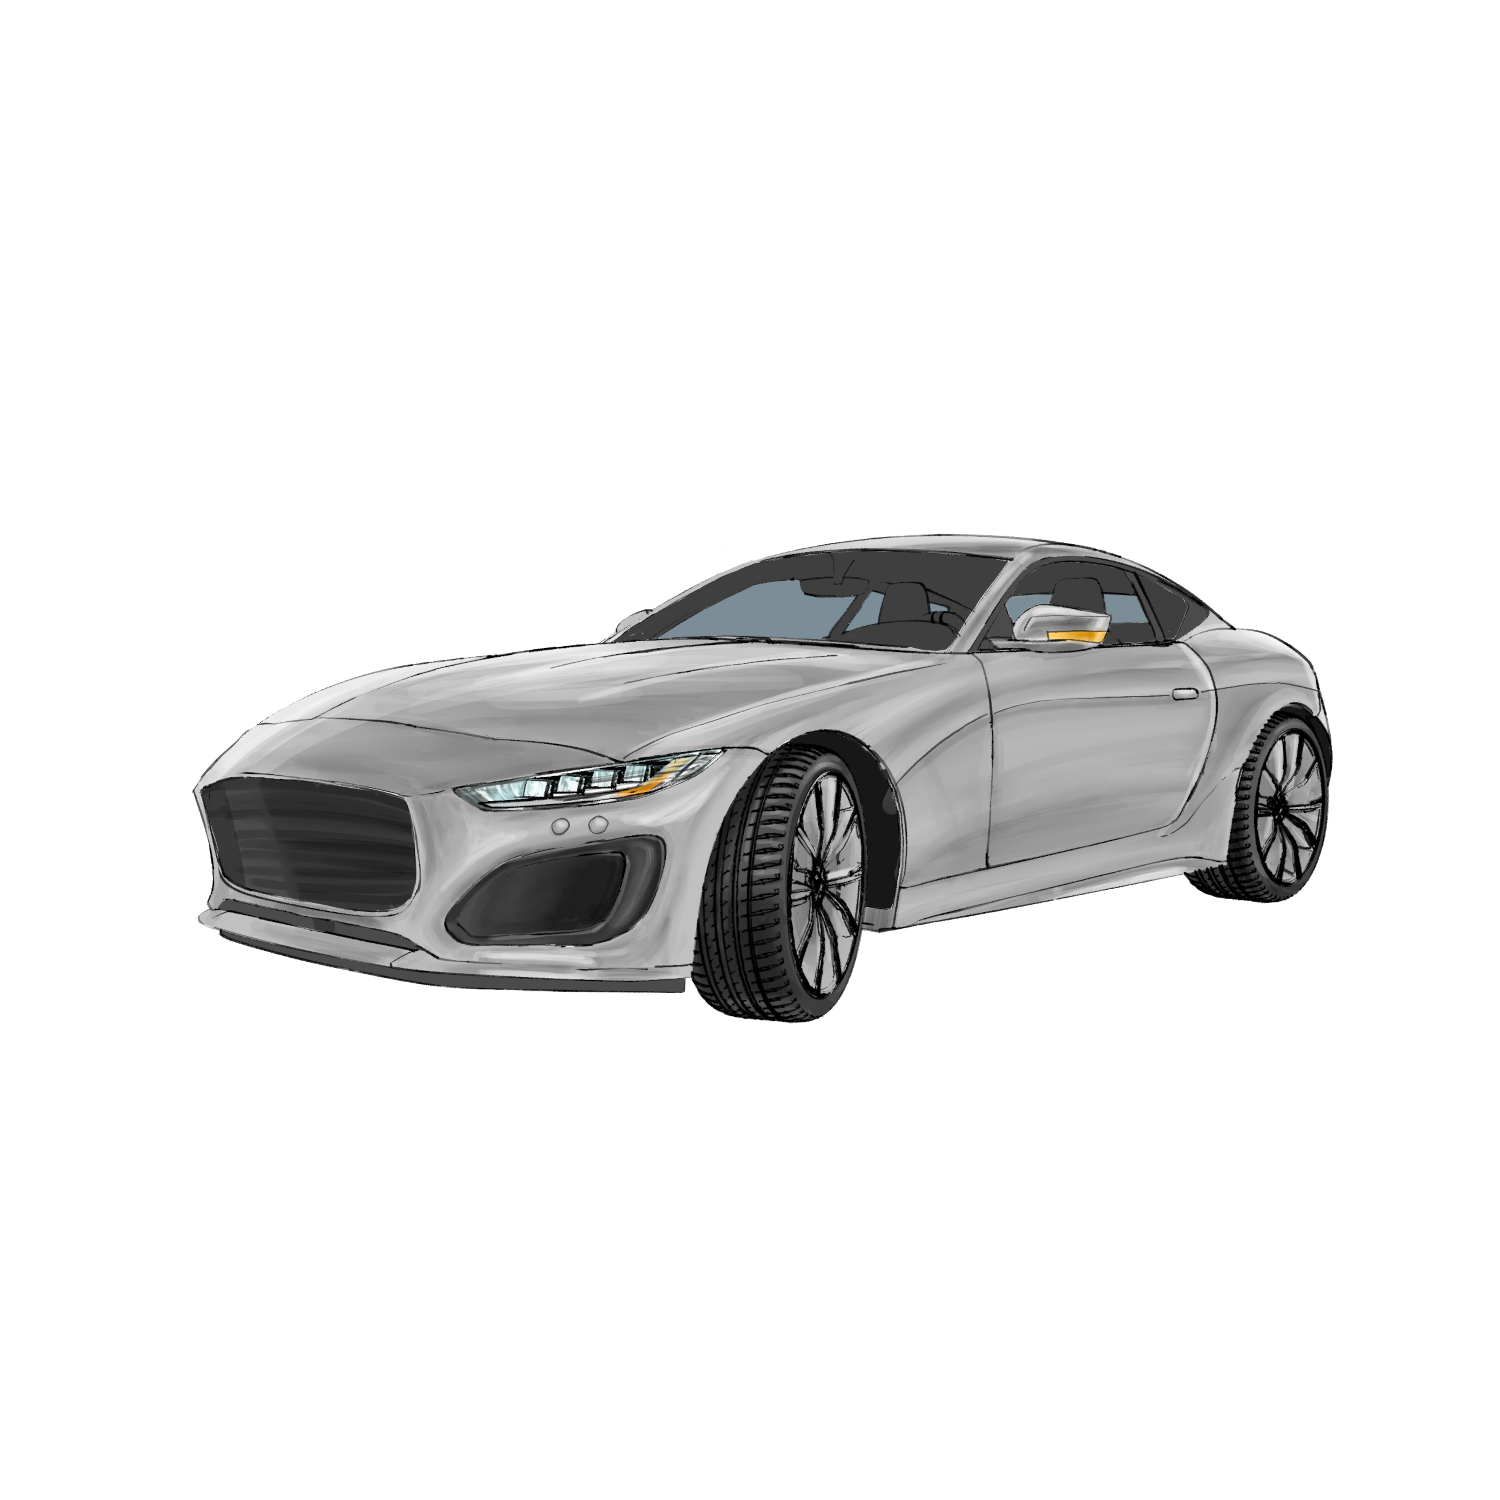  Product image 1 of the product “OX7 Coupé ”